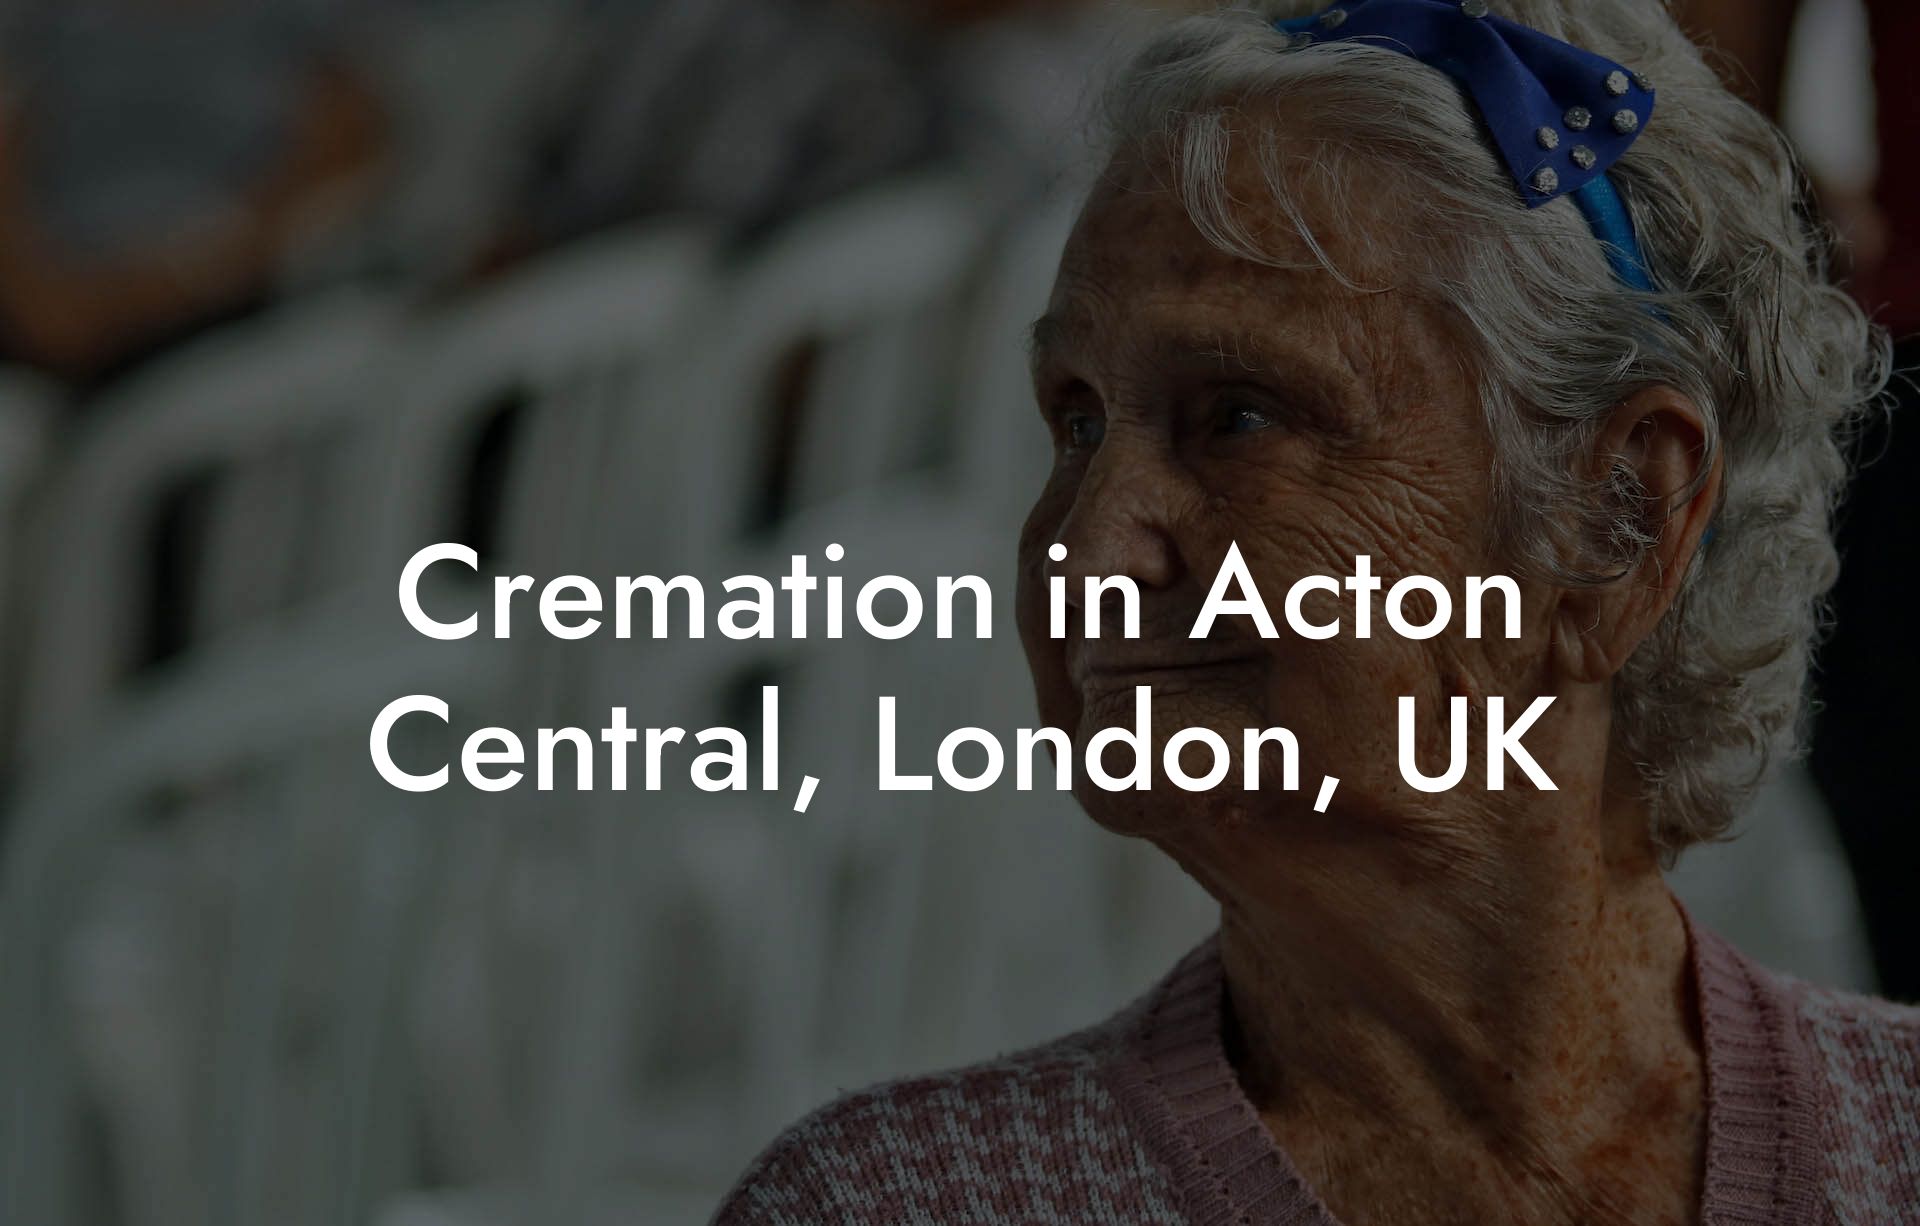 Cremation in Acton Central, London, UK